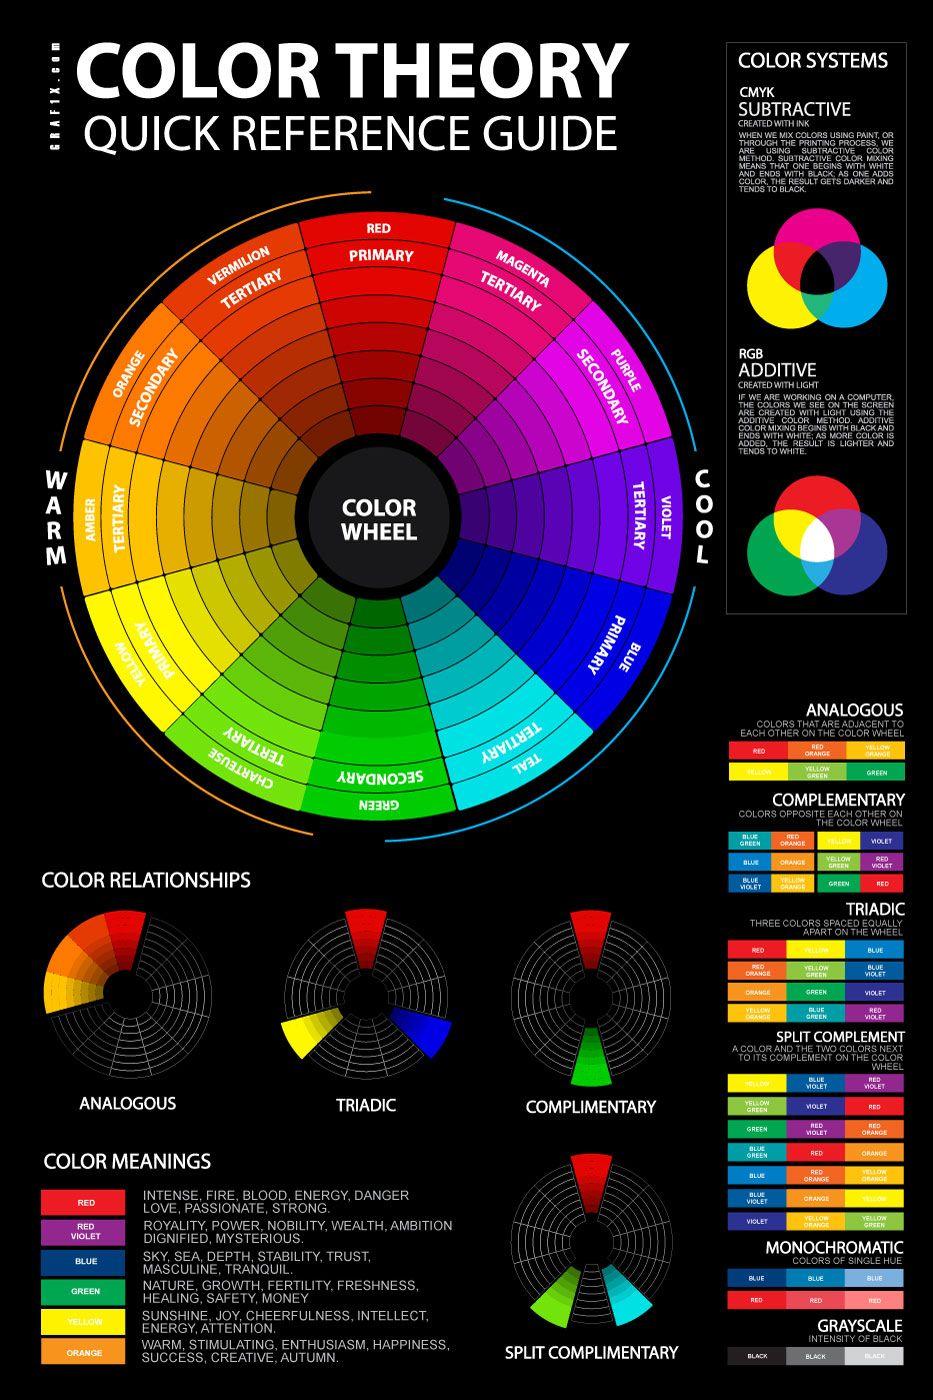 4 Colors Blue Green Yellow Logo - Color Meaning and Psychology of Red, Blue, Green, Yellow, Orange ...